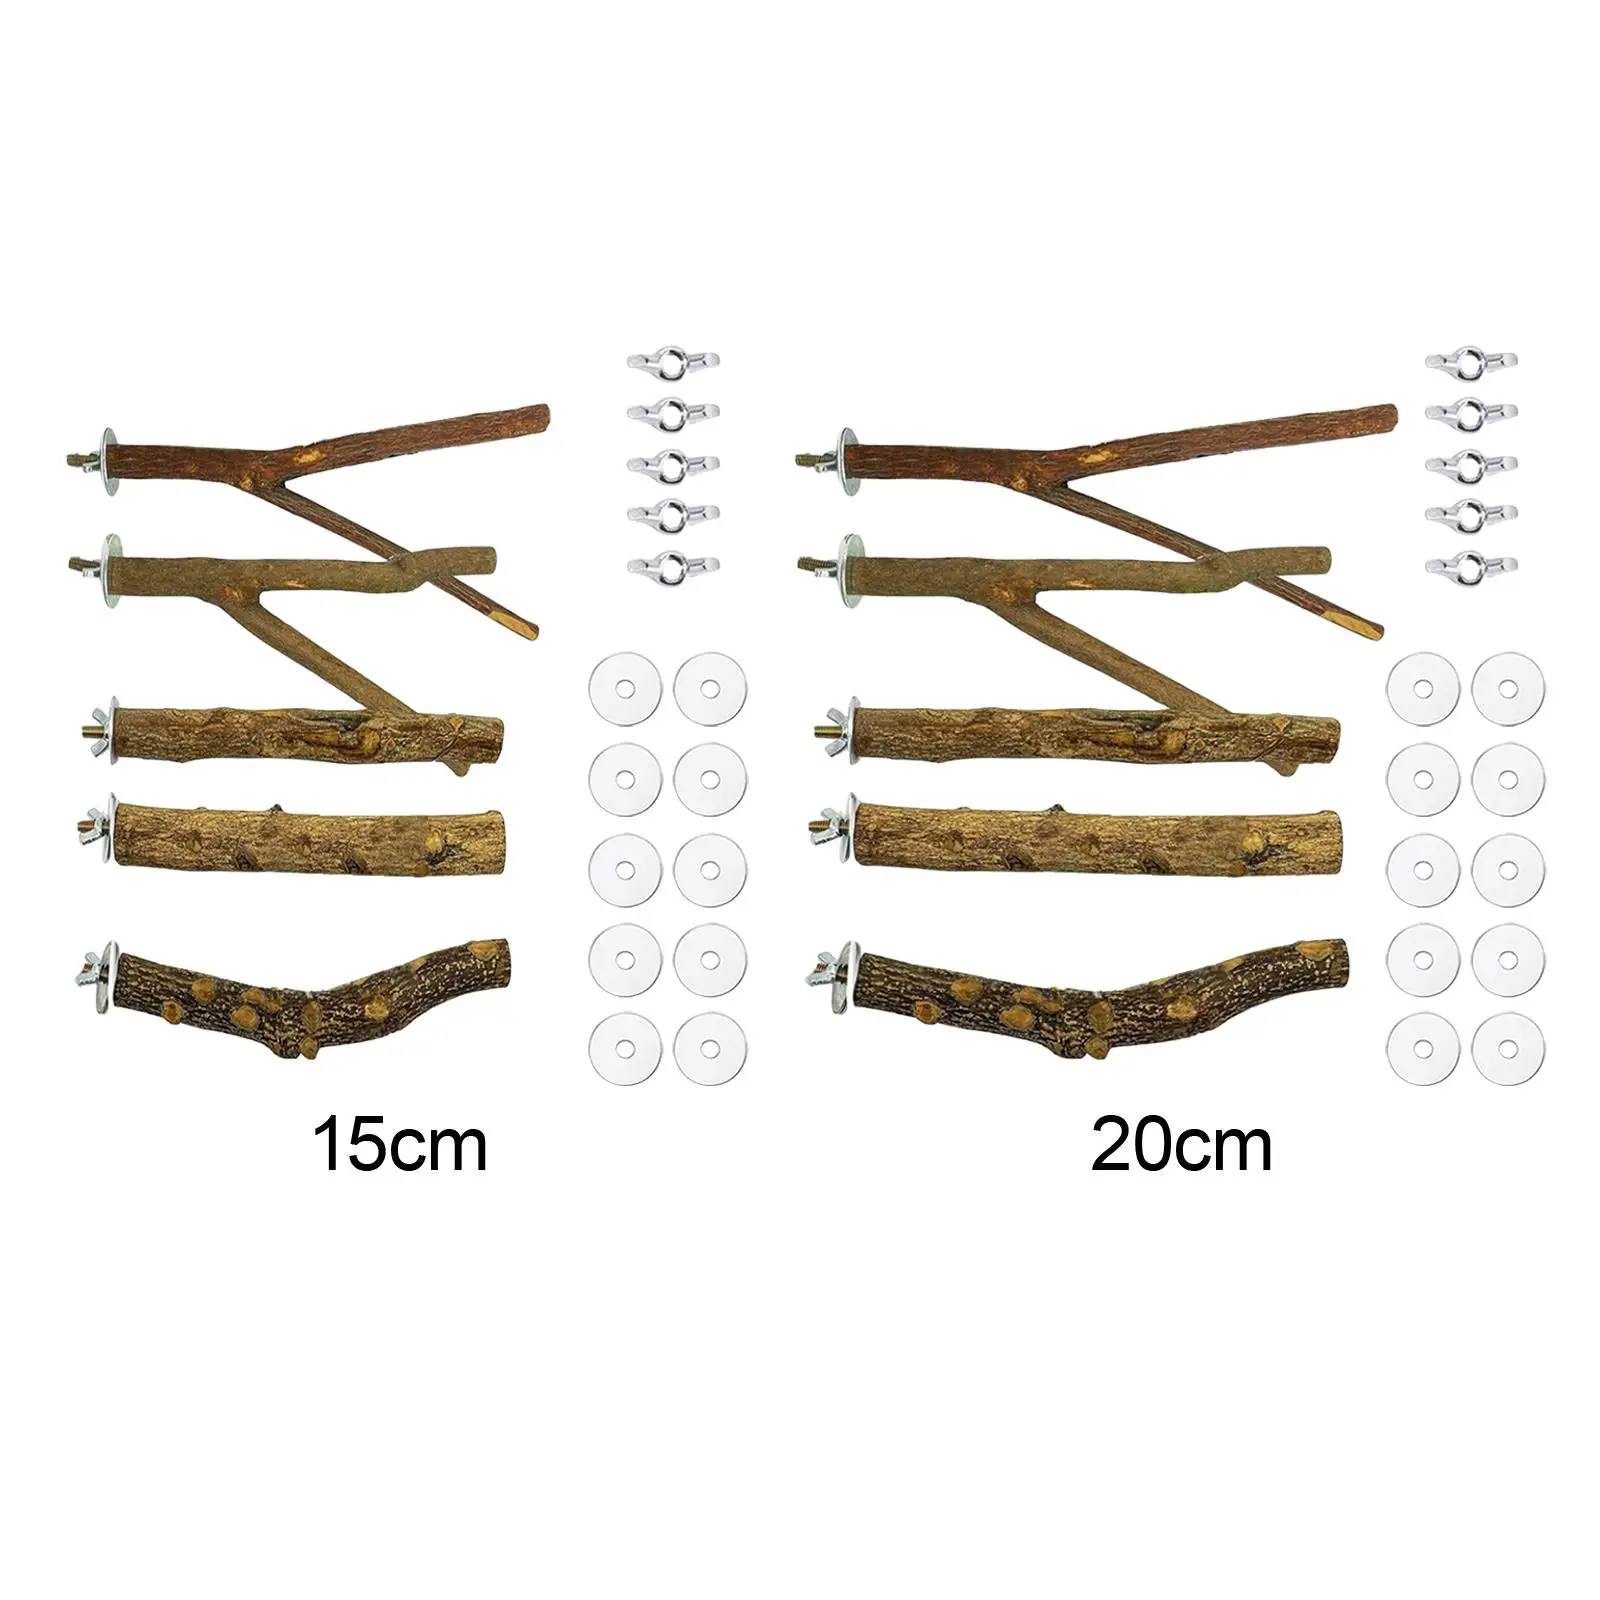 5x bird Perch Stand Cage Toys Chewing Toys Climbing Fork Tree Branch for Small Animal Guinea Pig Gerbil Rat Hedgehog